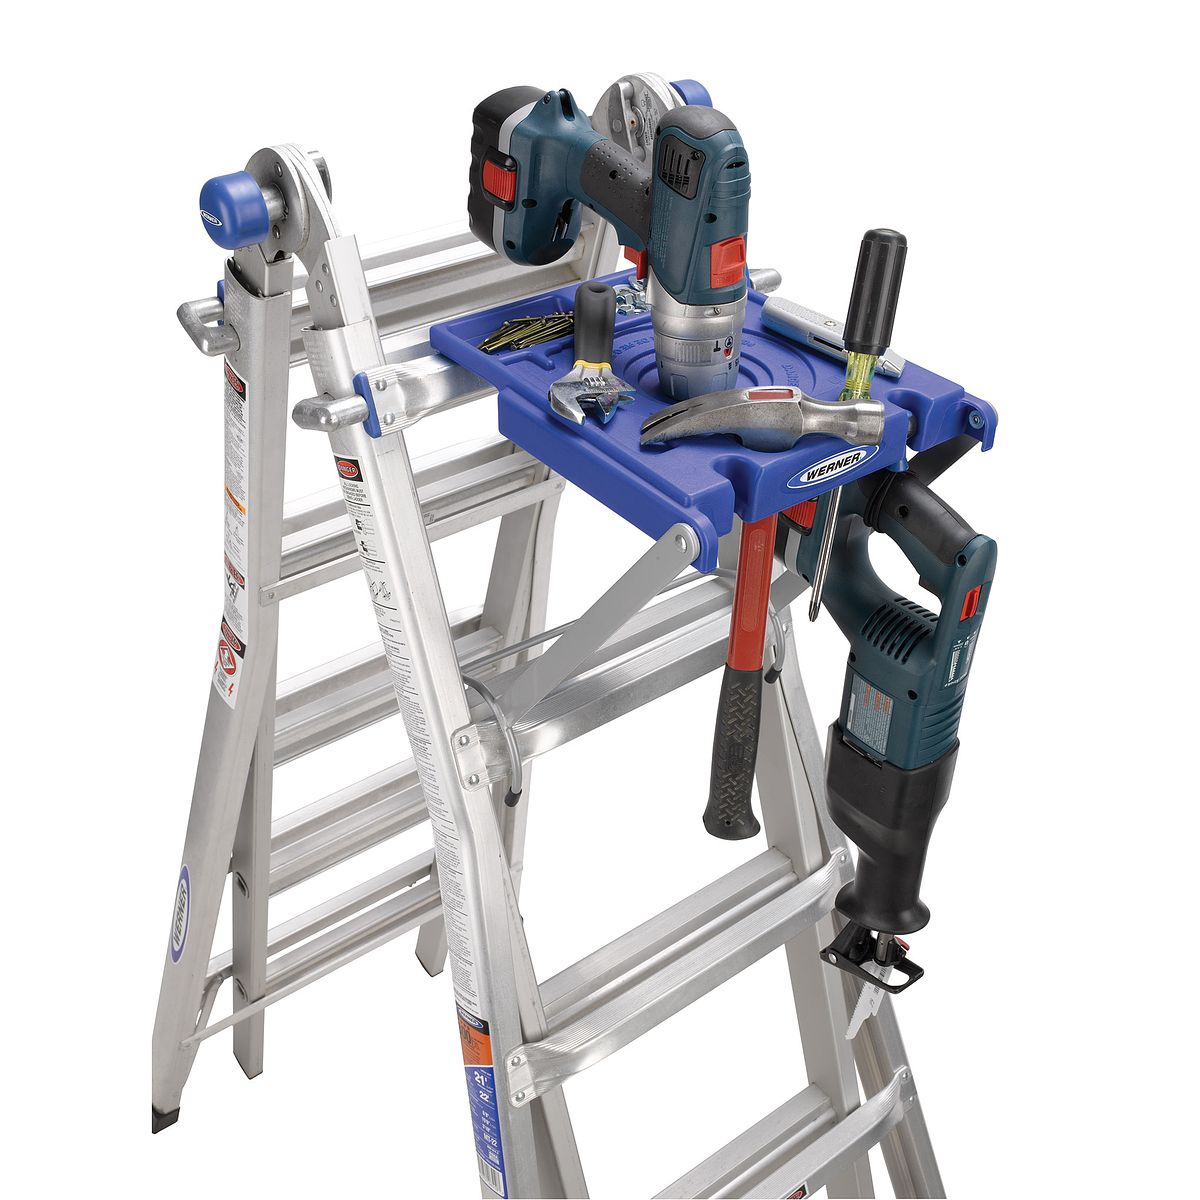 painting ladders and accessories